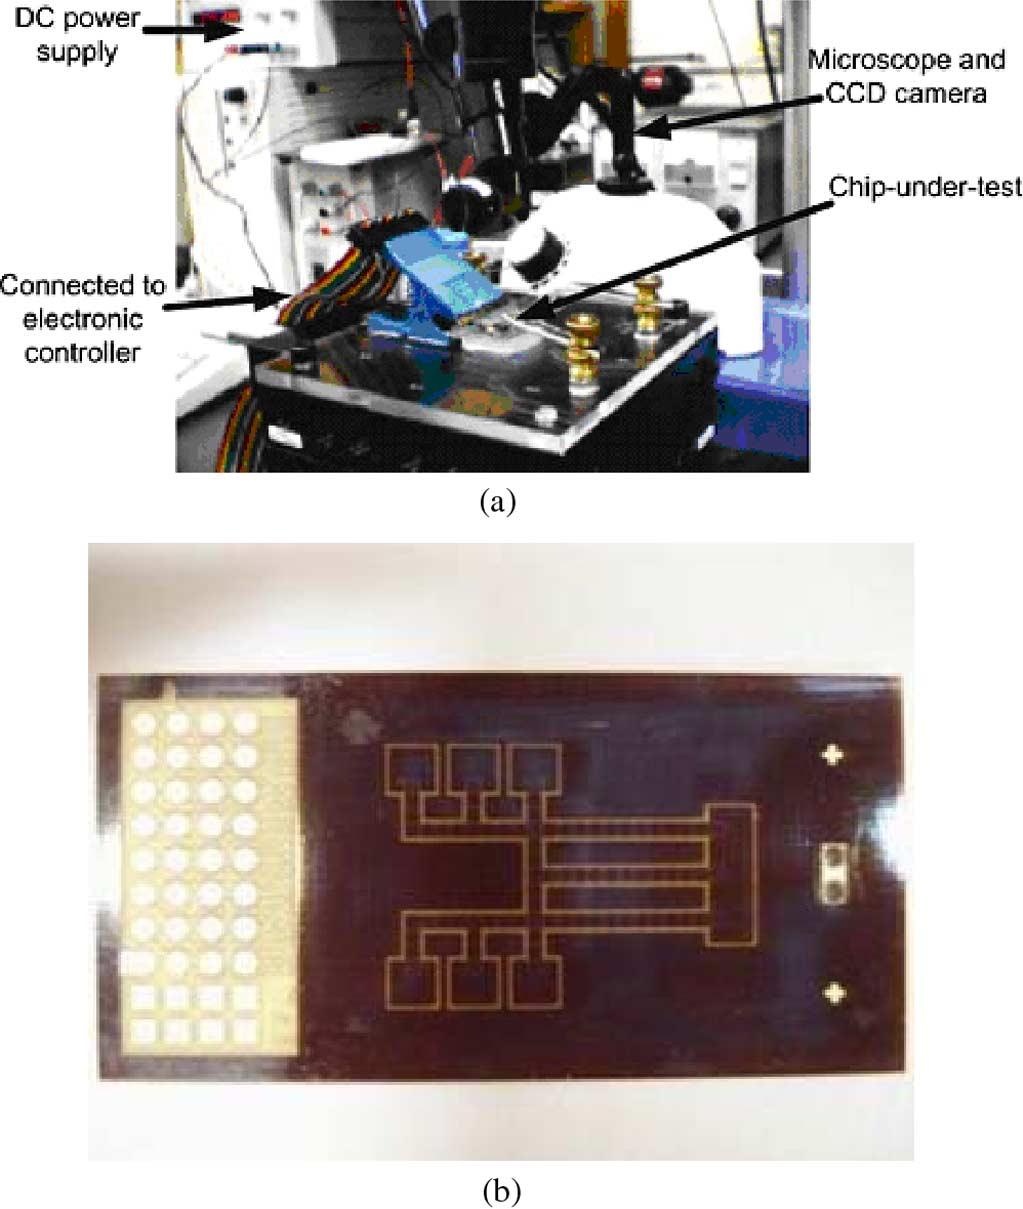 ZHAO AND CHAKRABARTY: DIGITAL MICROFLUIDIC LOGIC GATES 251 it is important to carry out functional testing to verify the functionality of the underlying microfluidic platform.